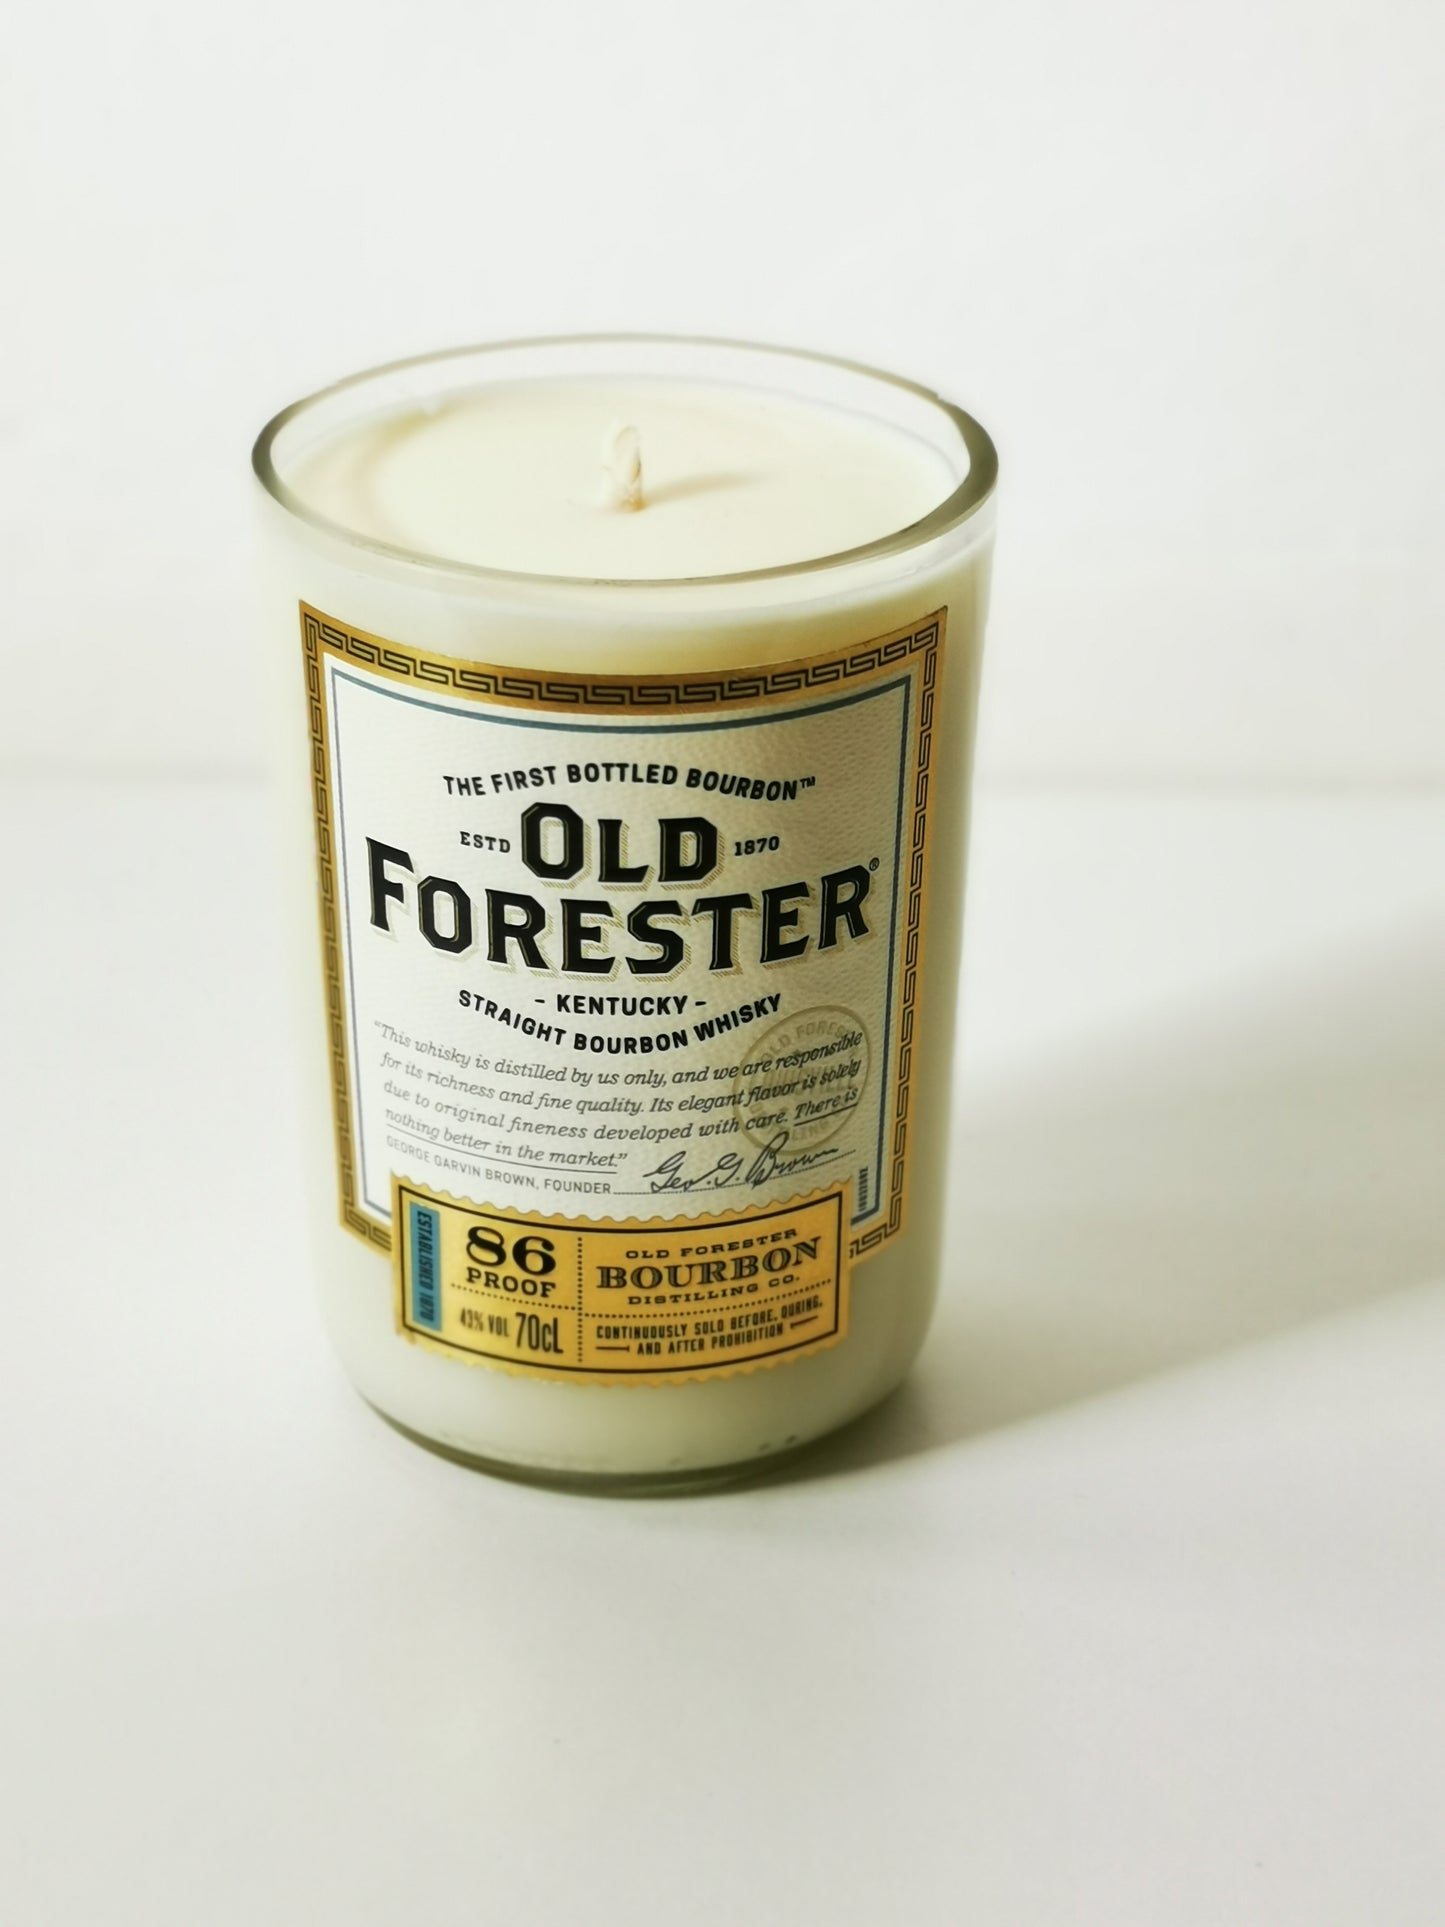 Eco Friendly-Old Forester Bourbon Whisky Bottle Candle-Whiskey Bottle Candles-Adhock Homeware